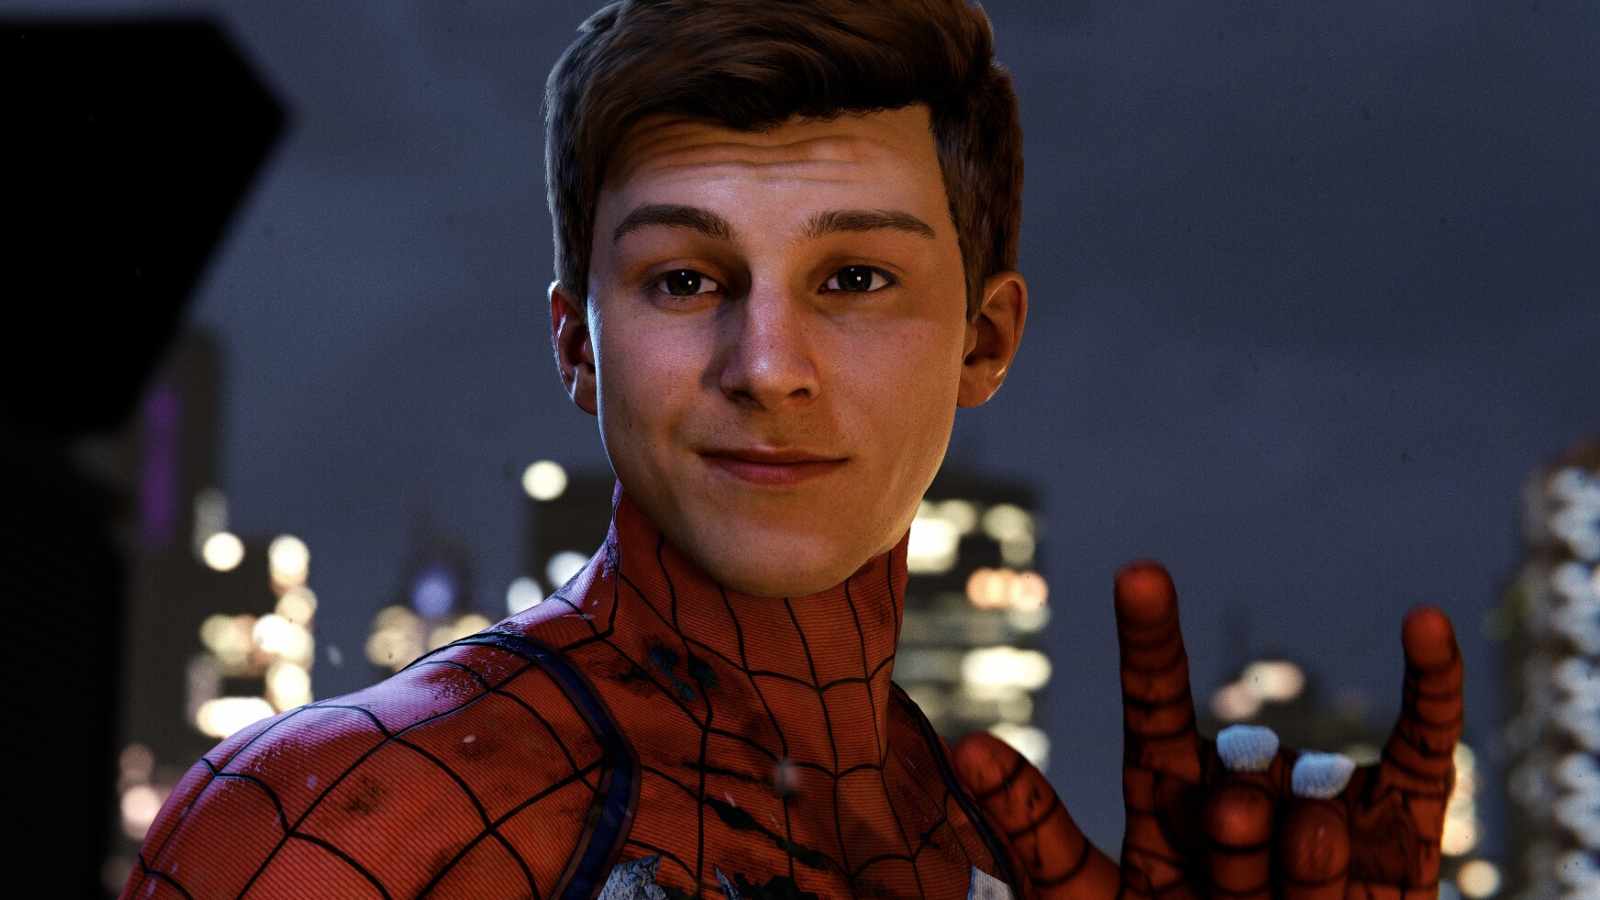 Spider-Man 2 players are so over Peter Parker “nerf” in new game - Dexerto